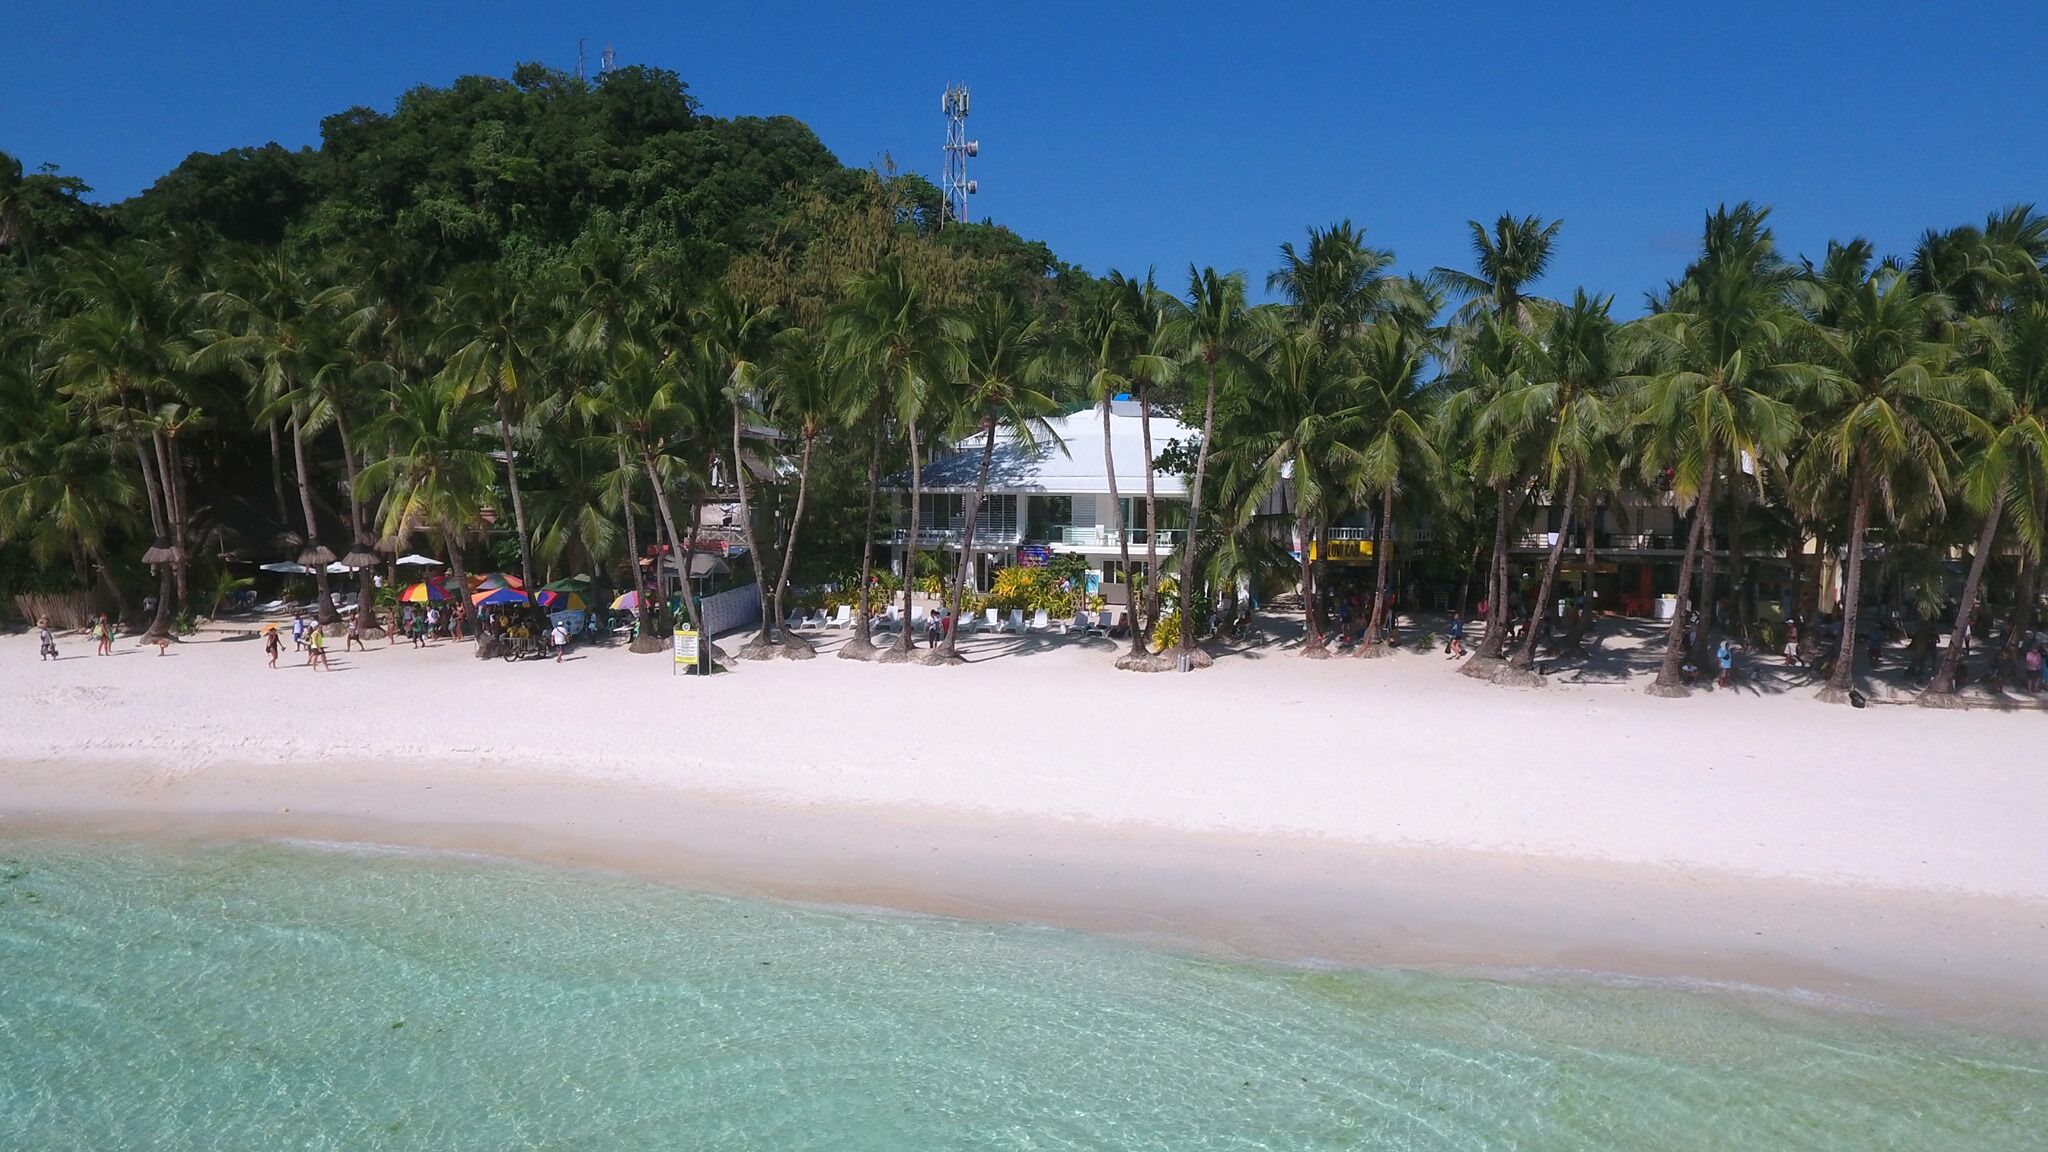 Every corner of Astoria Boracay is designed for a perfect tropical getaway.